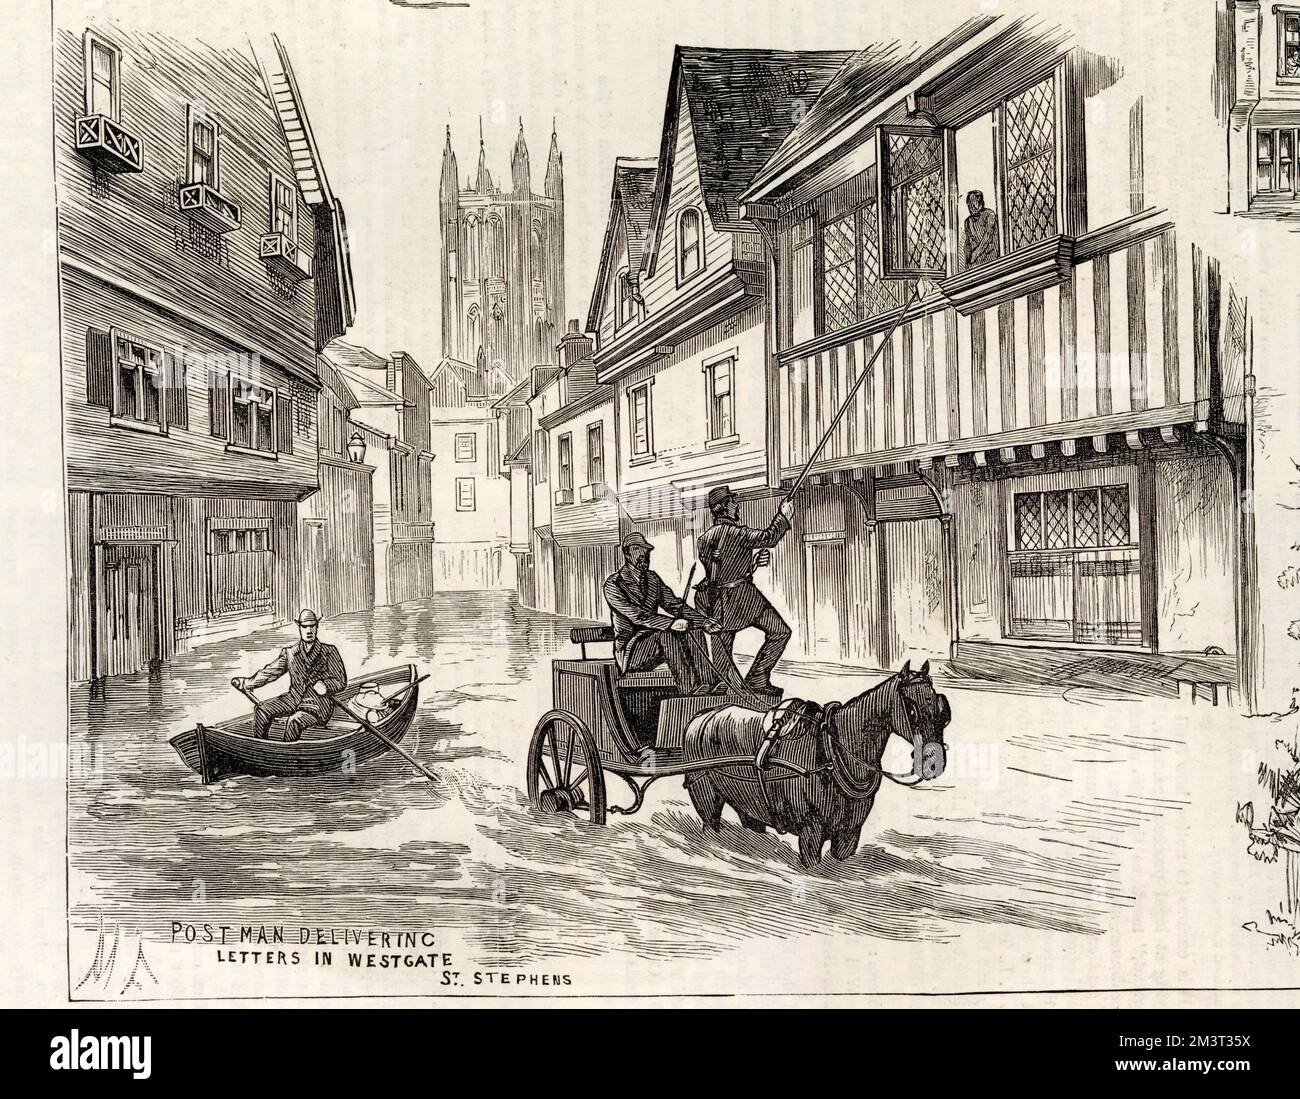 Flooding in Canterbury in 1882. A postman delivers letters to a resident in a house in medieval Westgate by means of a horse and carriage and long pole, while someone else passes by in a rowing boat! Stock Photo